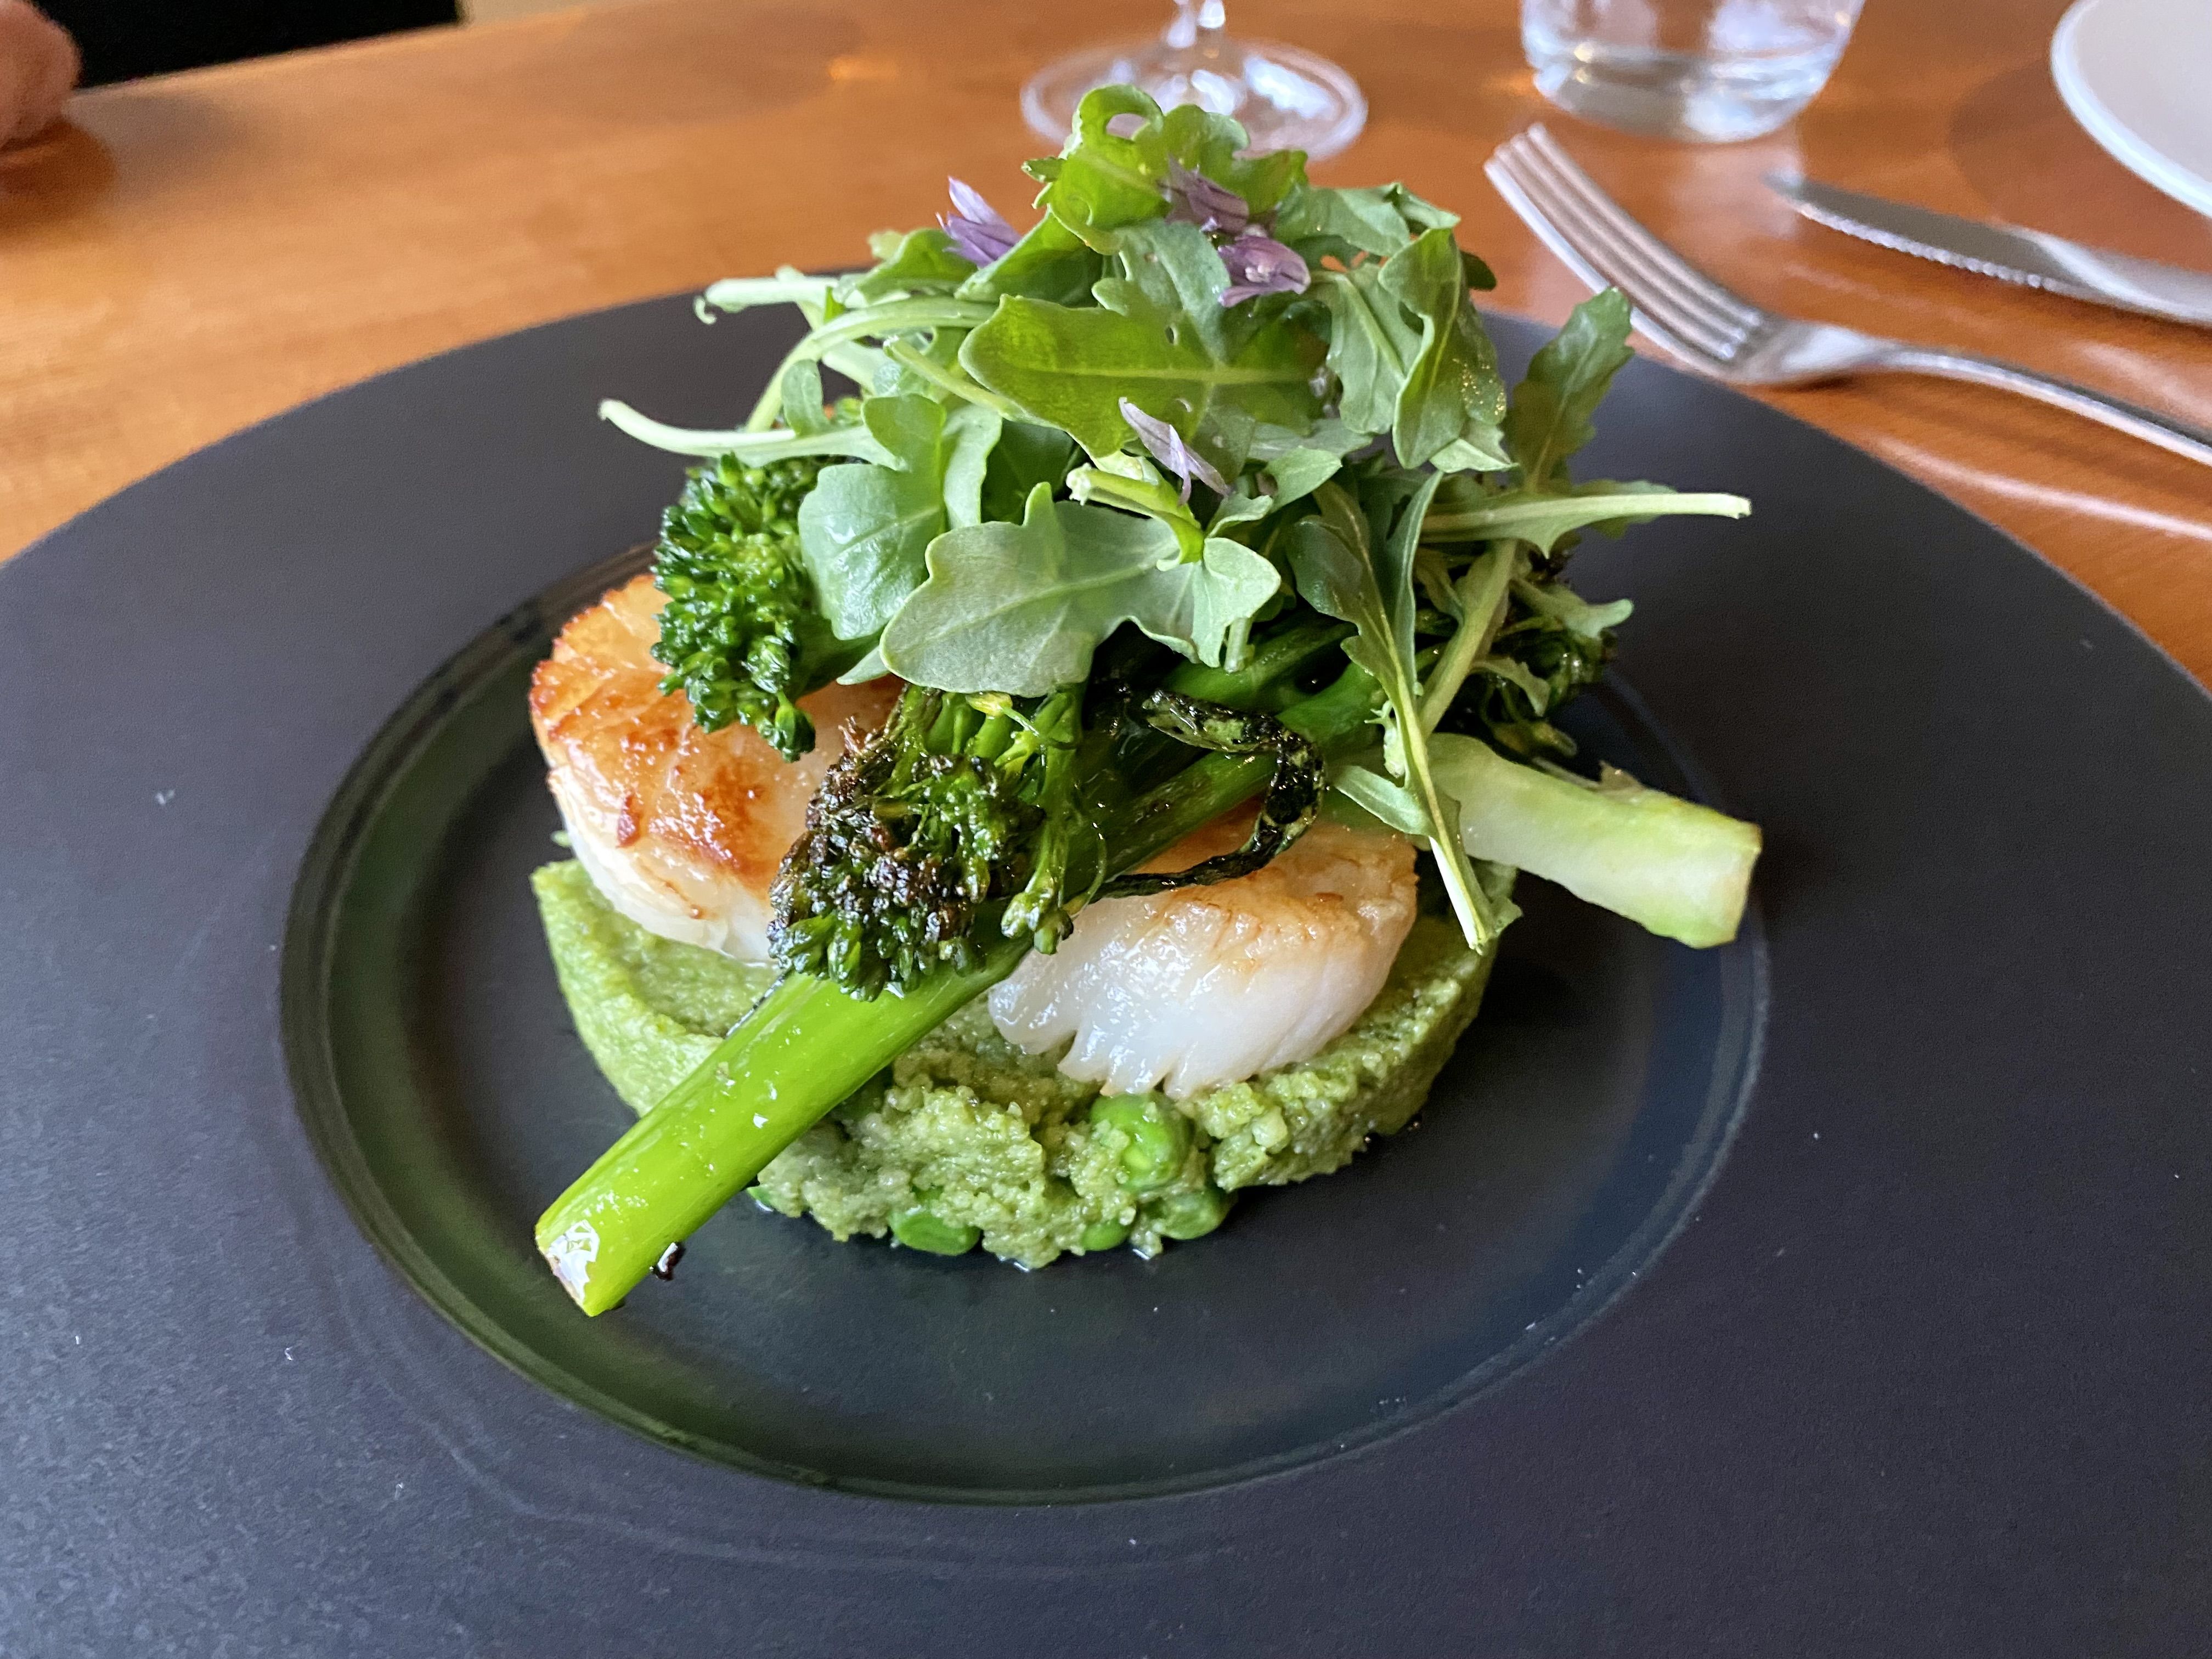 Scallops and broccolini atop a bed of green couscouse, shaped into a circle, on a dark plate with microgreens.